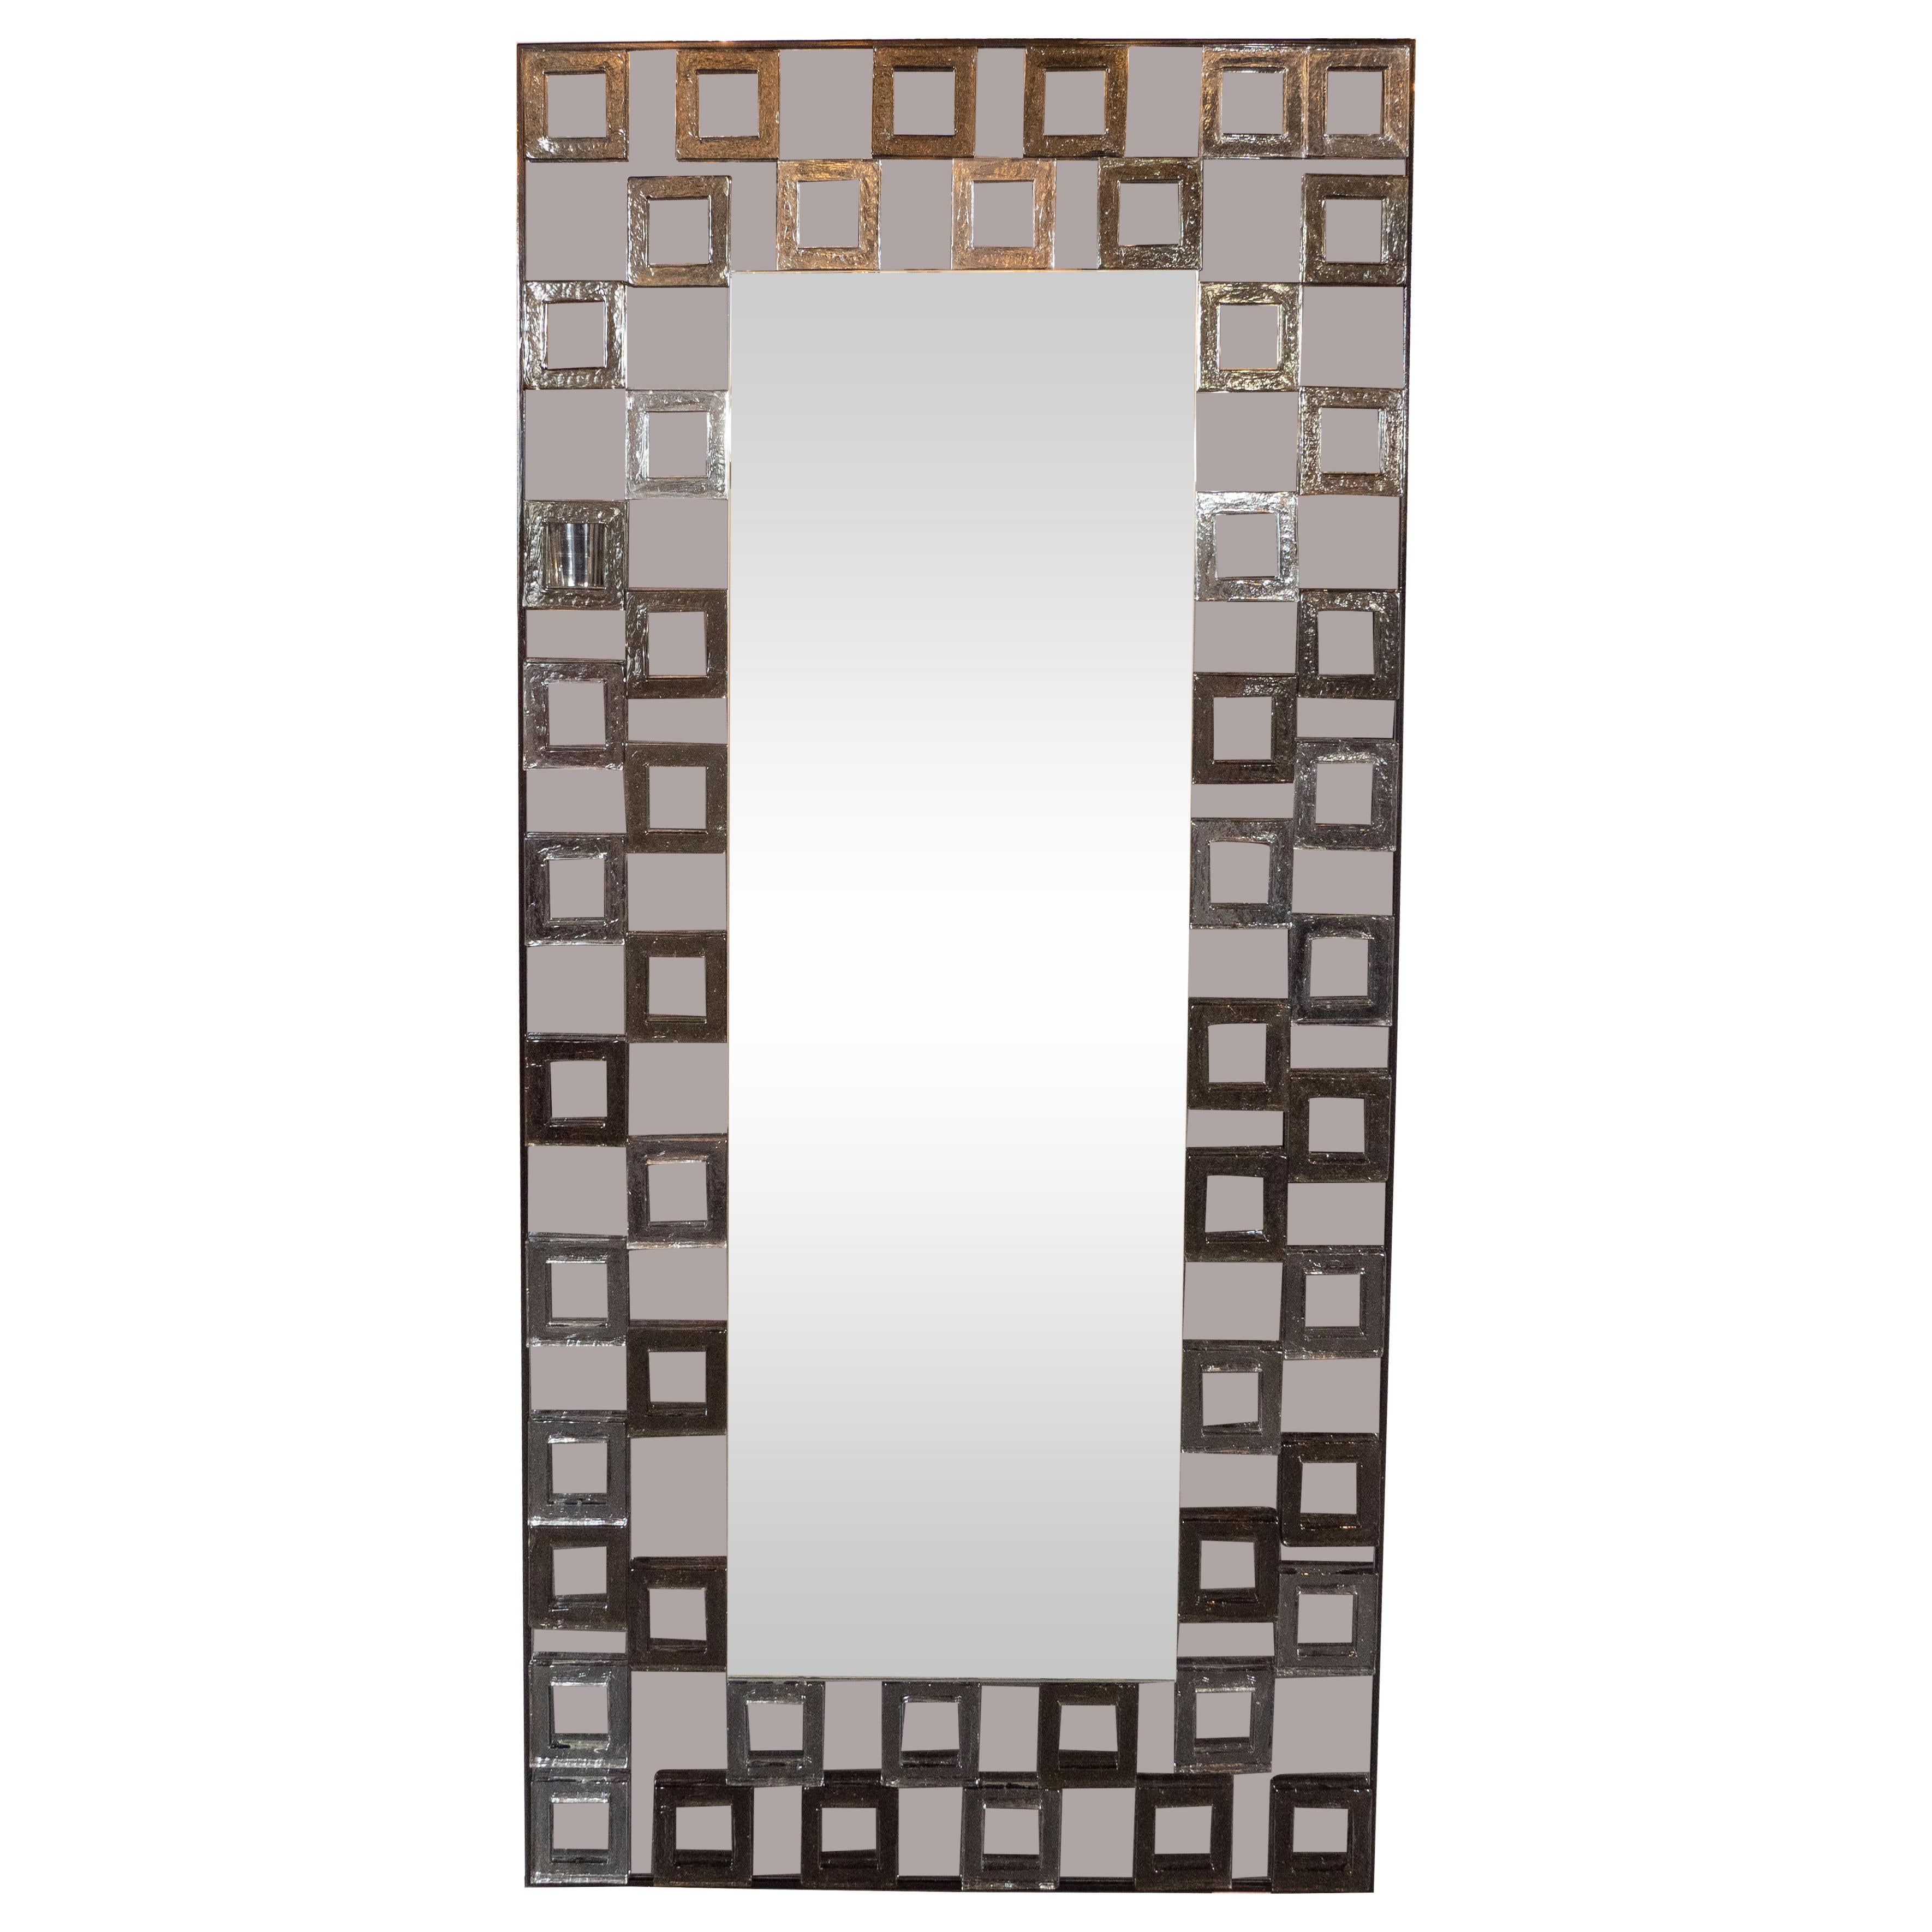 Modernist Handblown Murano Smoked Mirror with Repeating Square Motifs